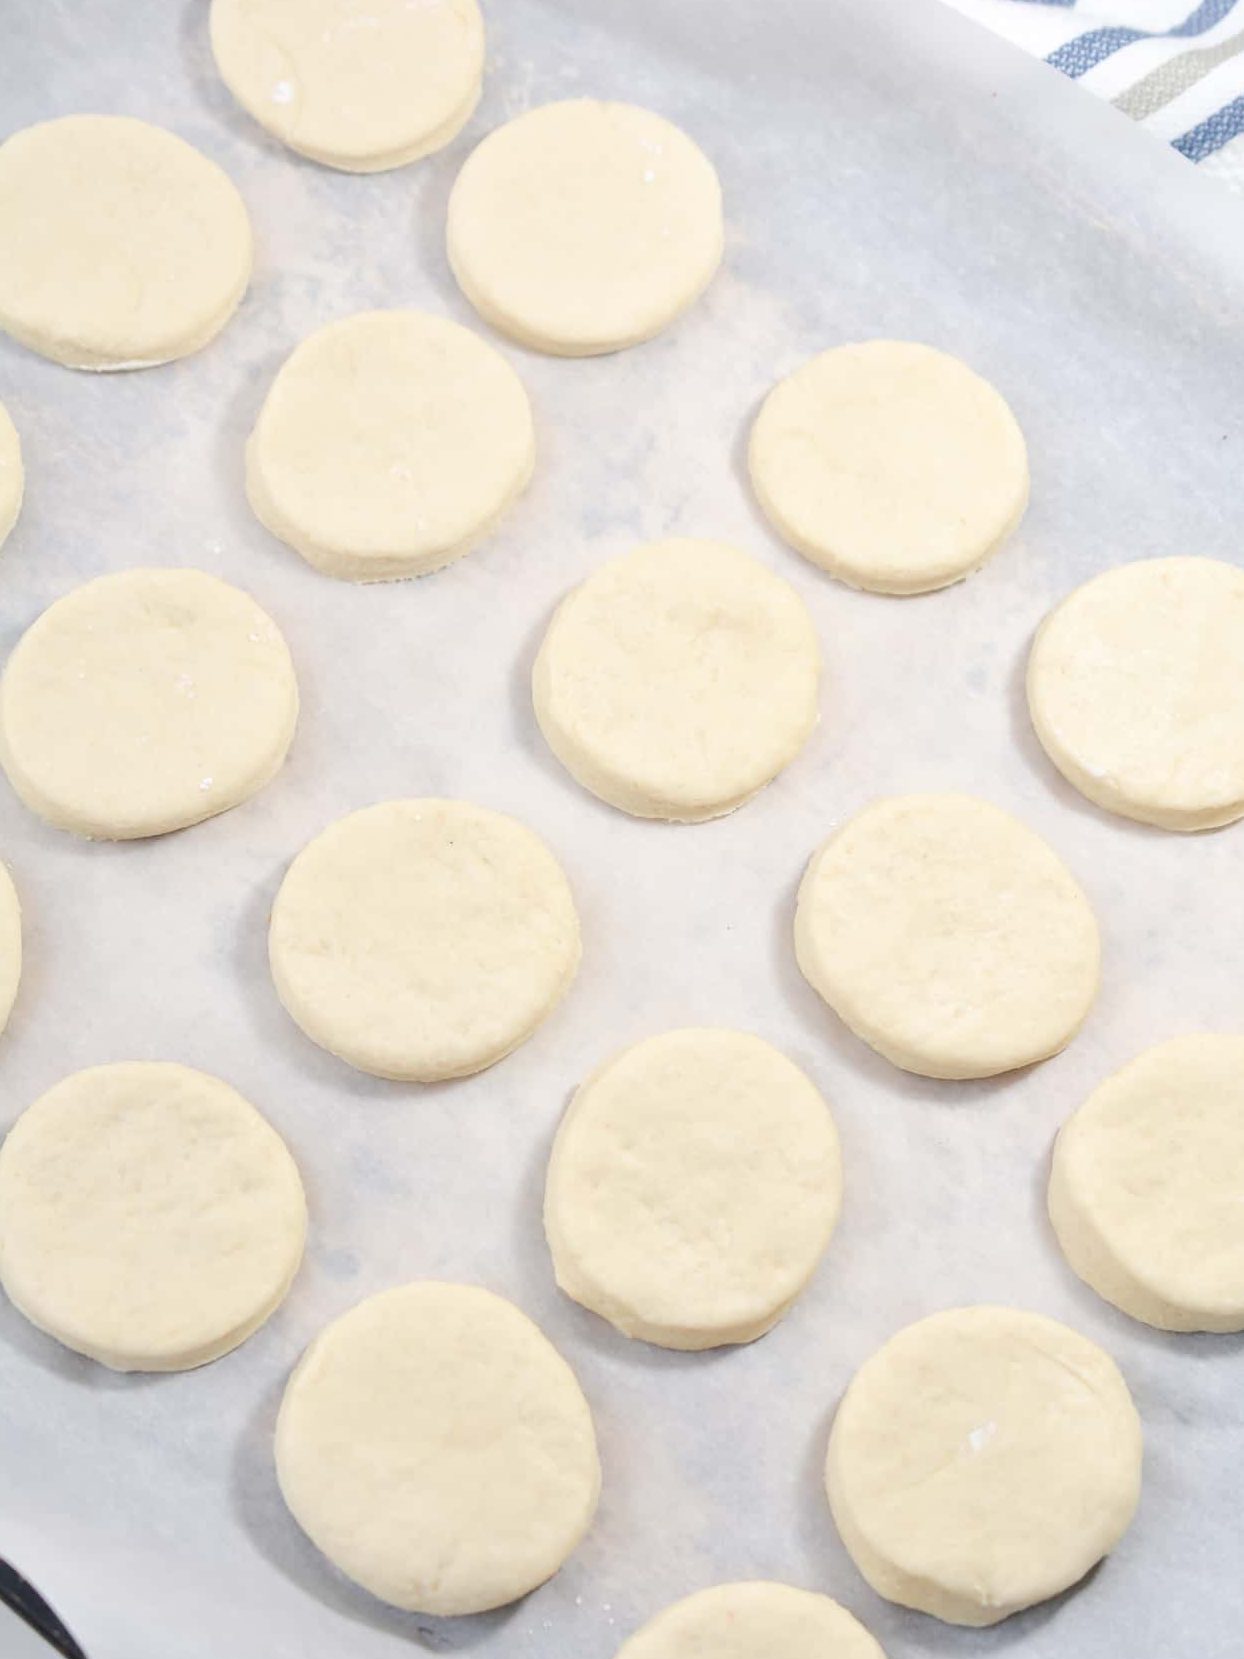 Place the circles of dough on a parchment lined baking sheet.